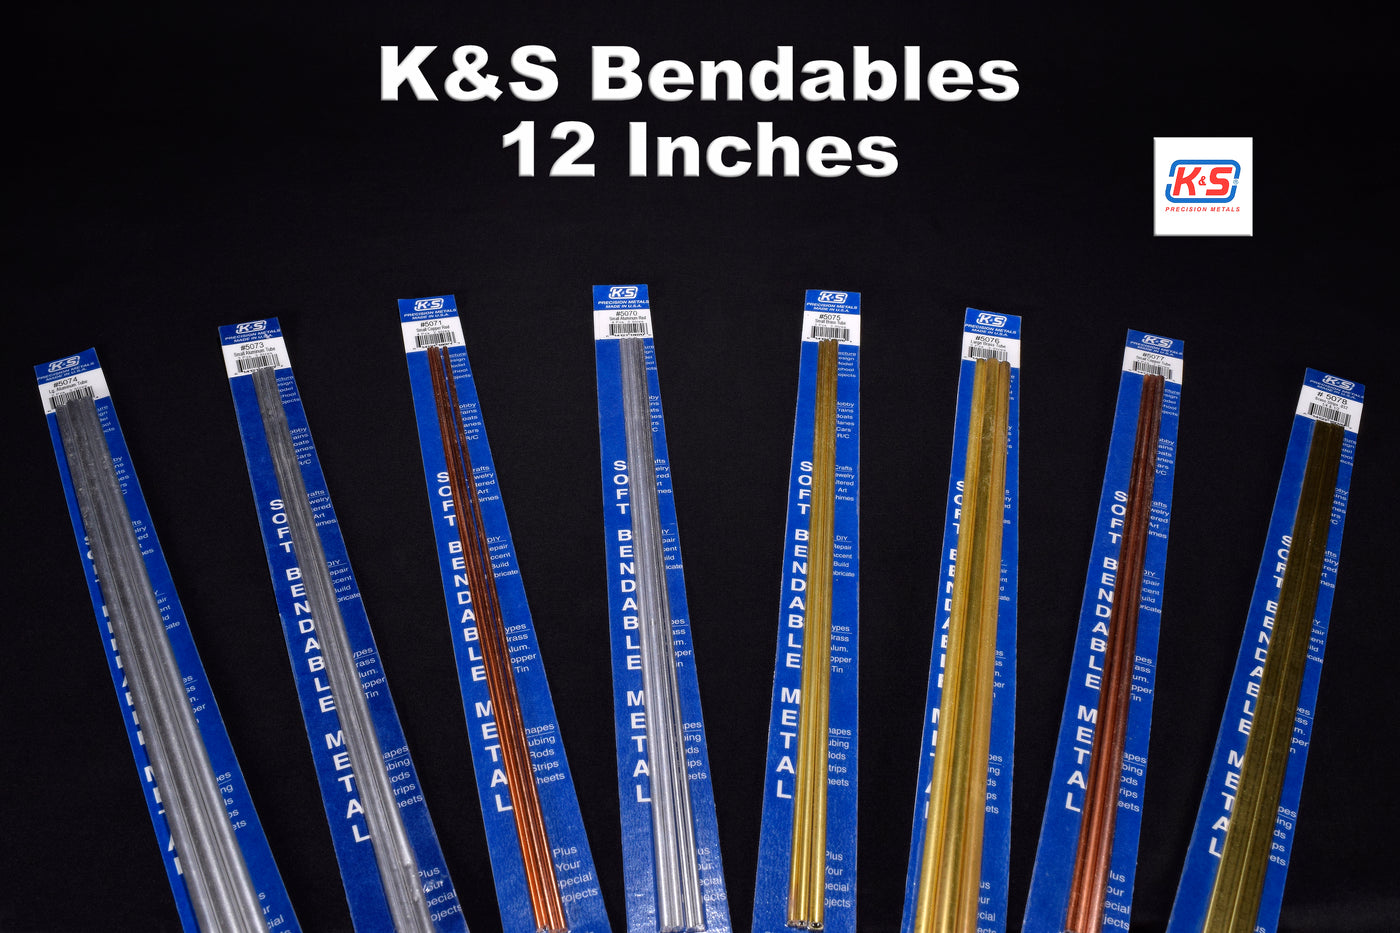 K&S Bendable Aluminum Tube 3/16, 7/32 and 1/4 1pc. Each